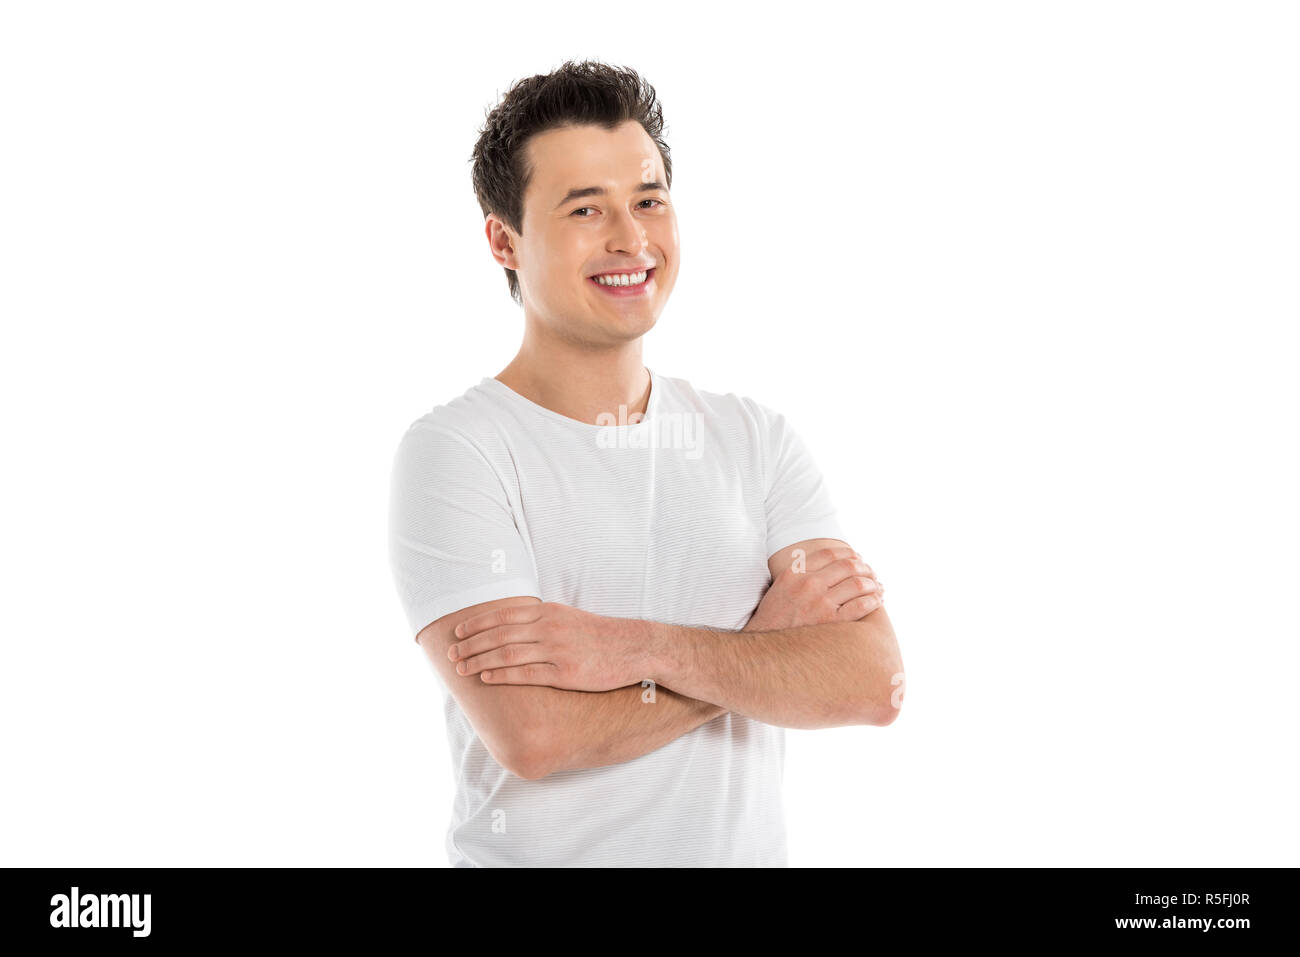 portrait of handsome smiling man with crossed arms looking at camera isolated on white Stock Photo